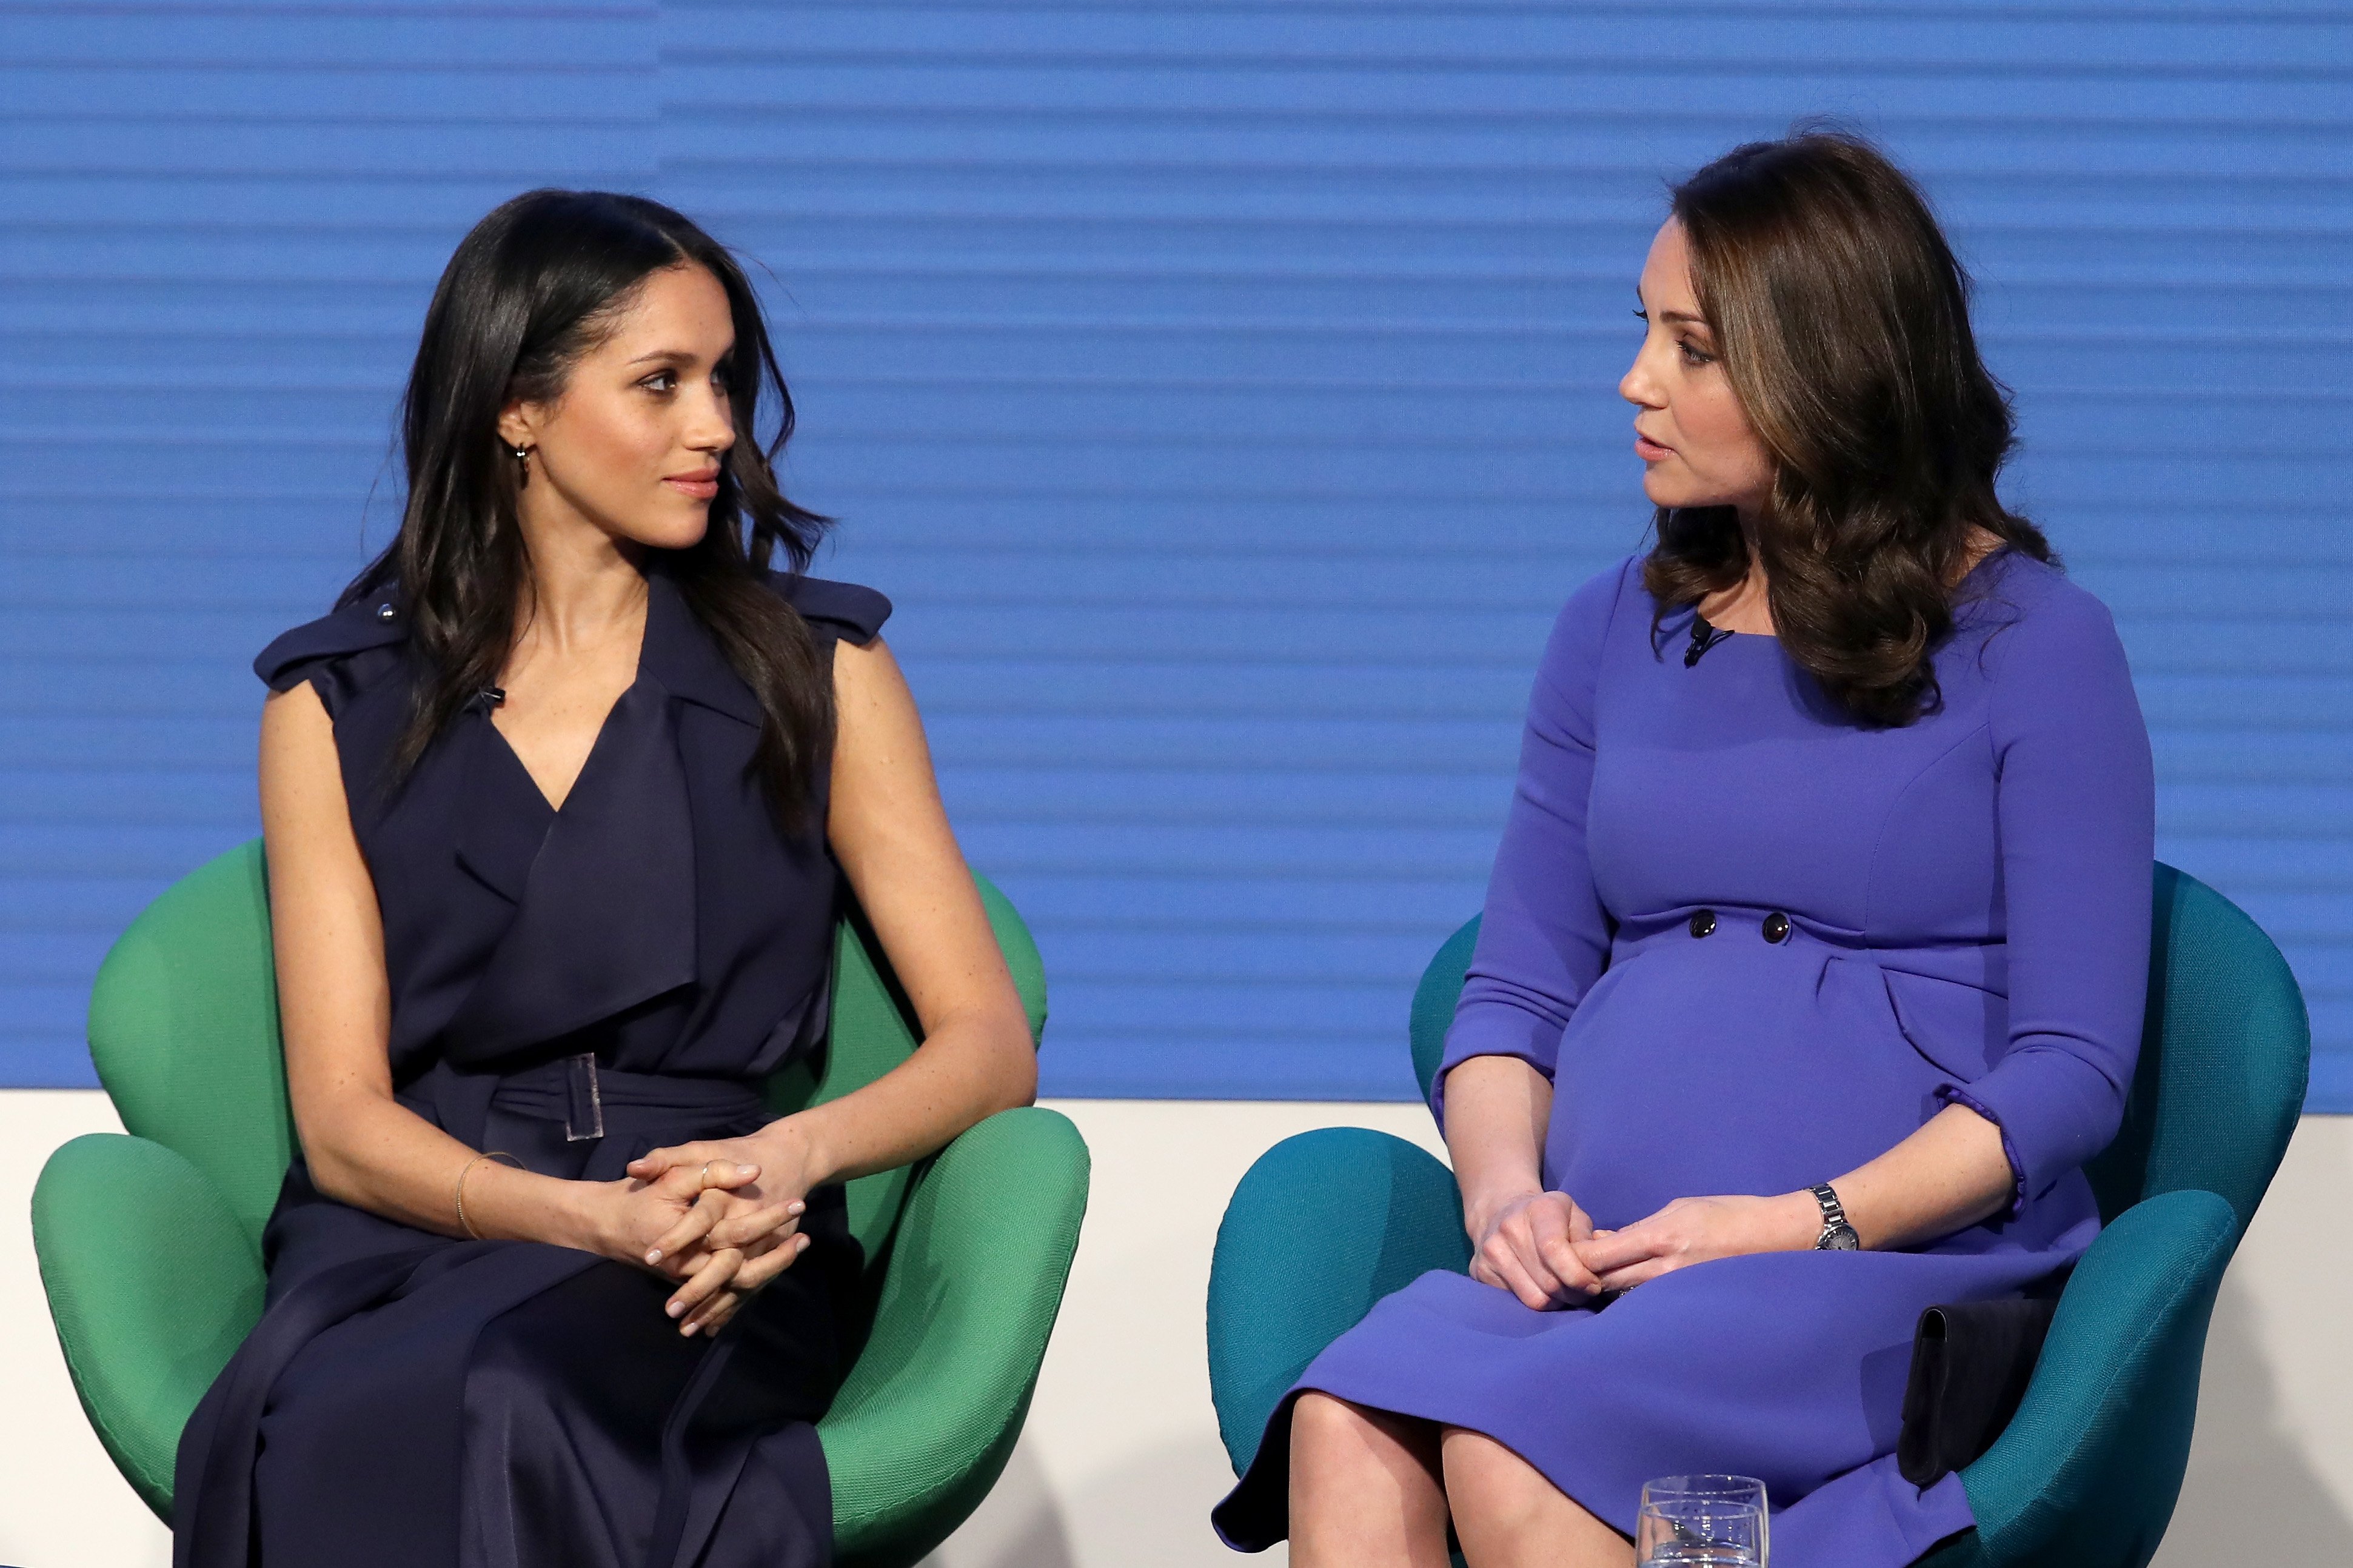 Meghan Markle and Kate Middleton attend the first annual Royal Foundation Forum held at Aviva on February 28, 2018 in London, England | Photo: Getty Images